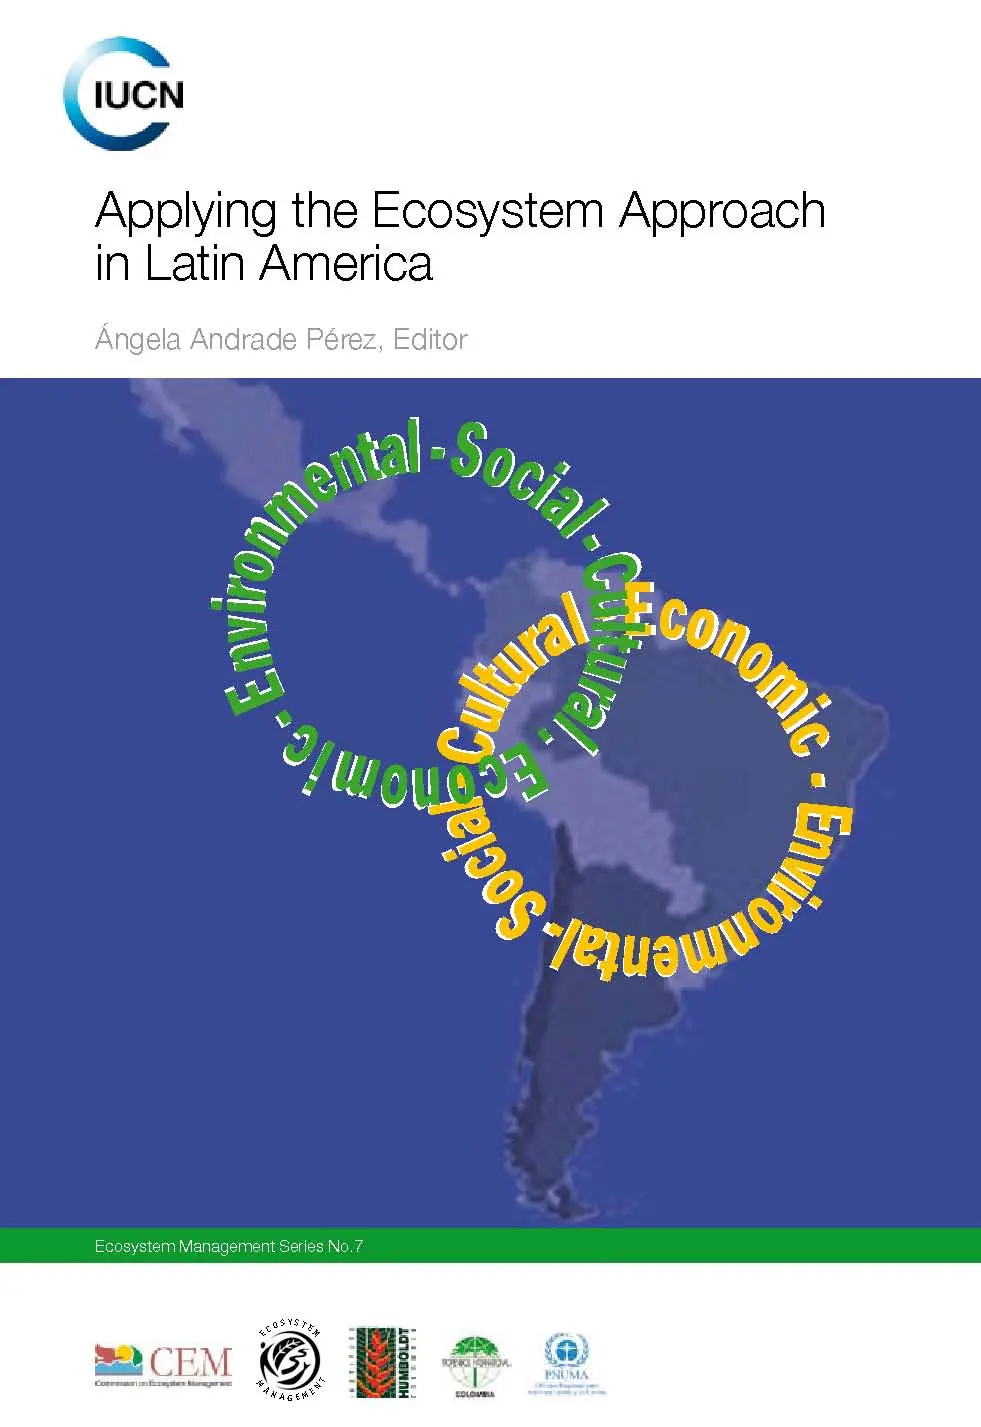 Applying the Ecosystem Approach in Latin America